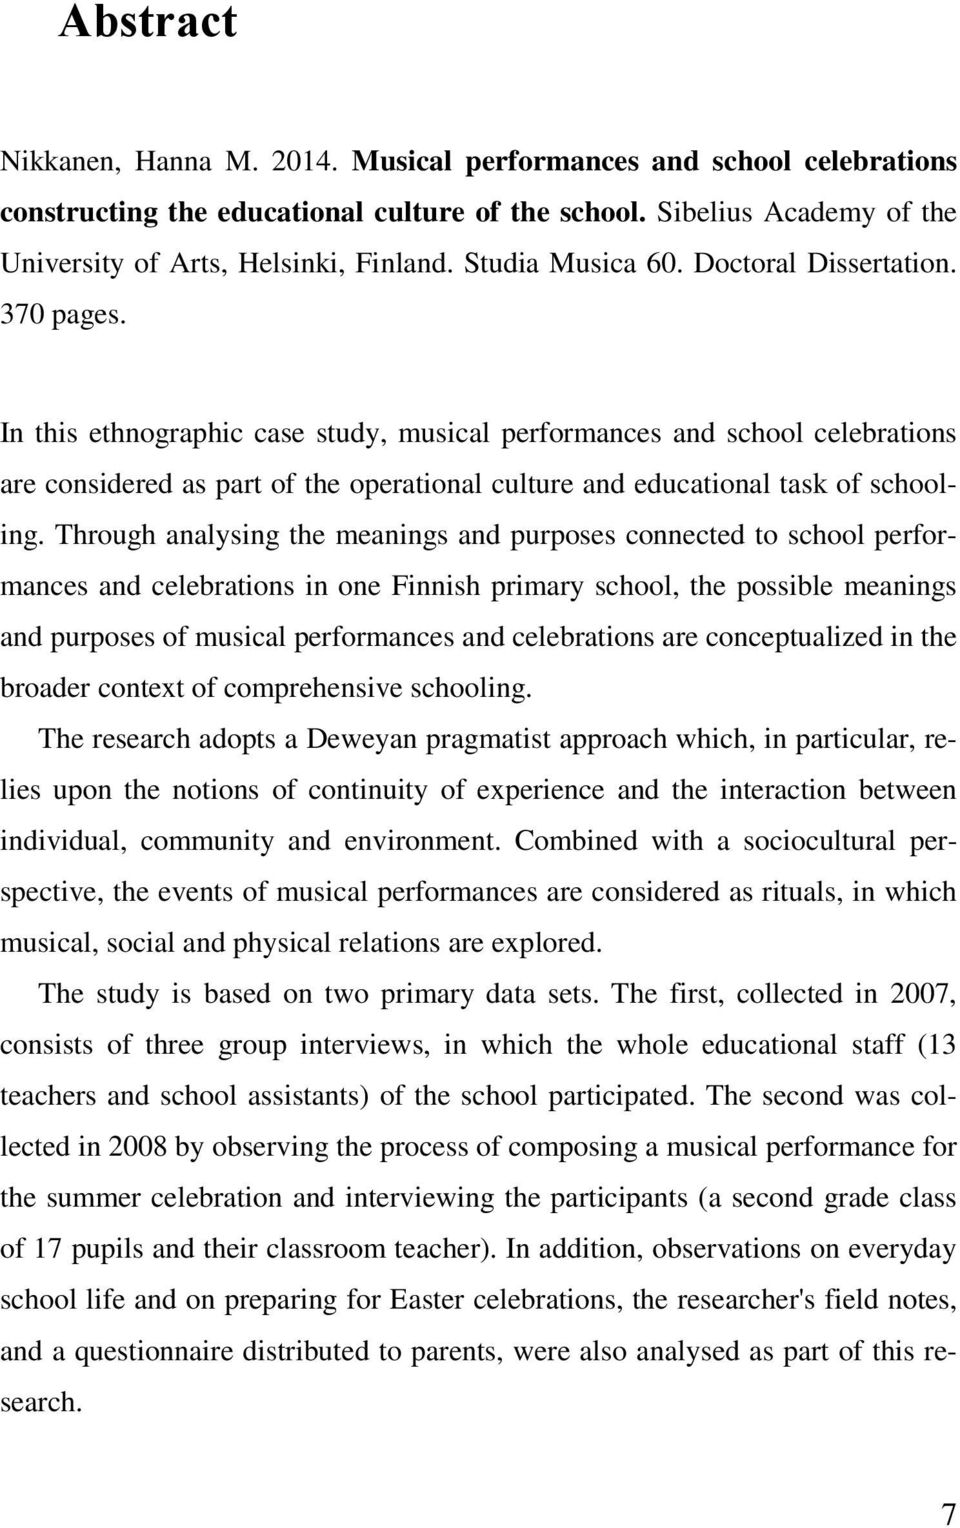 In this ethnographic case study, musical performances and school celebrations are considered as part of the operational culture and educational task of schooling.